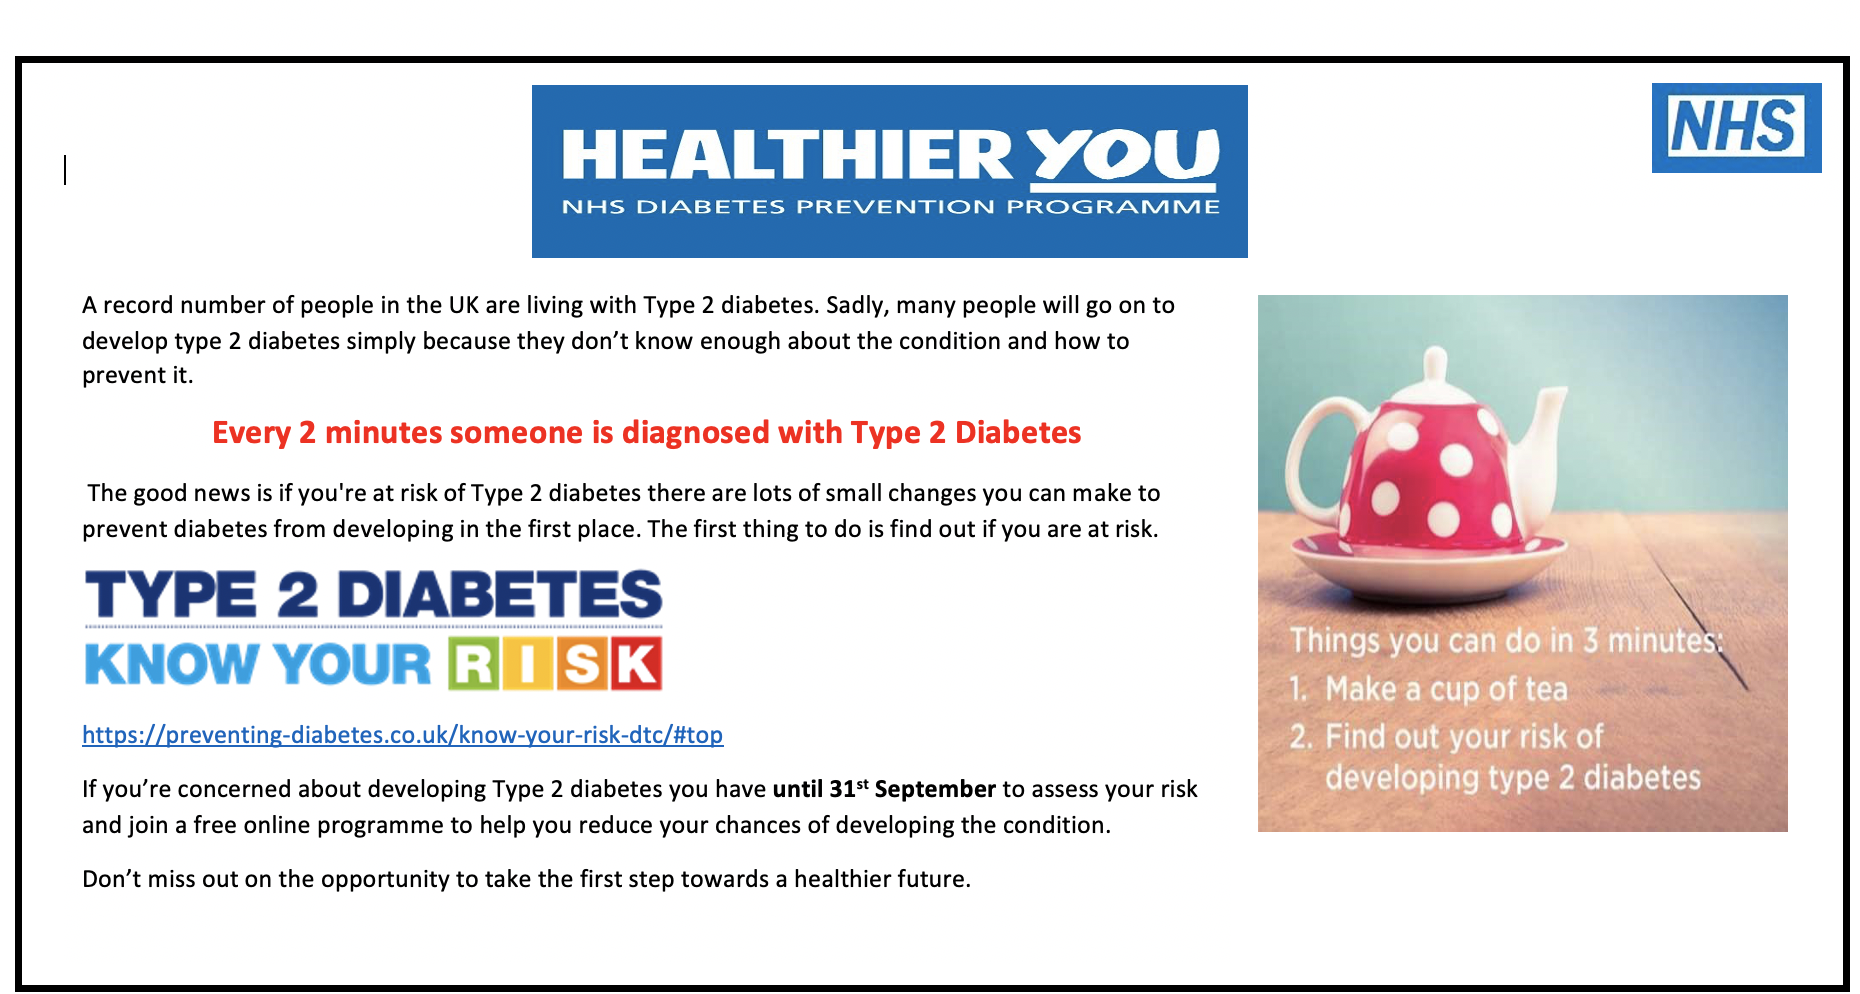 Type 2 Diabetes - know YOUR risk featured image